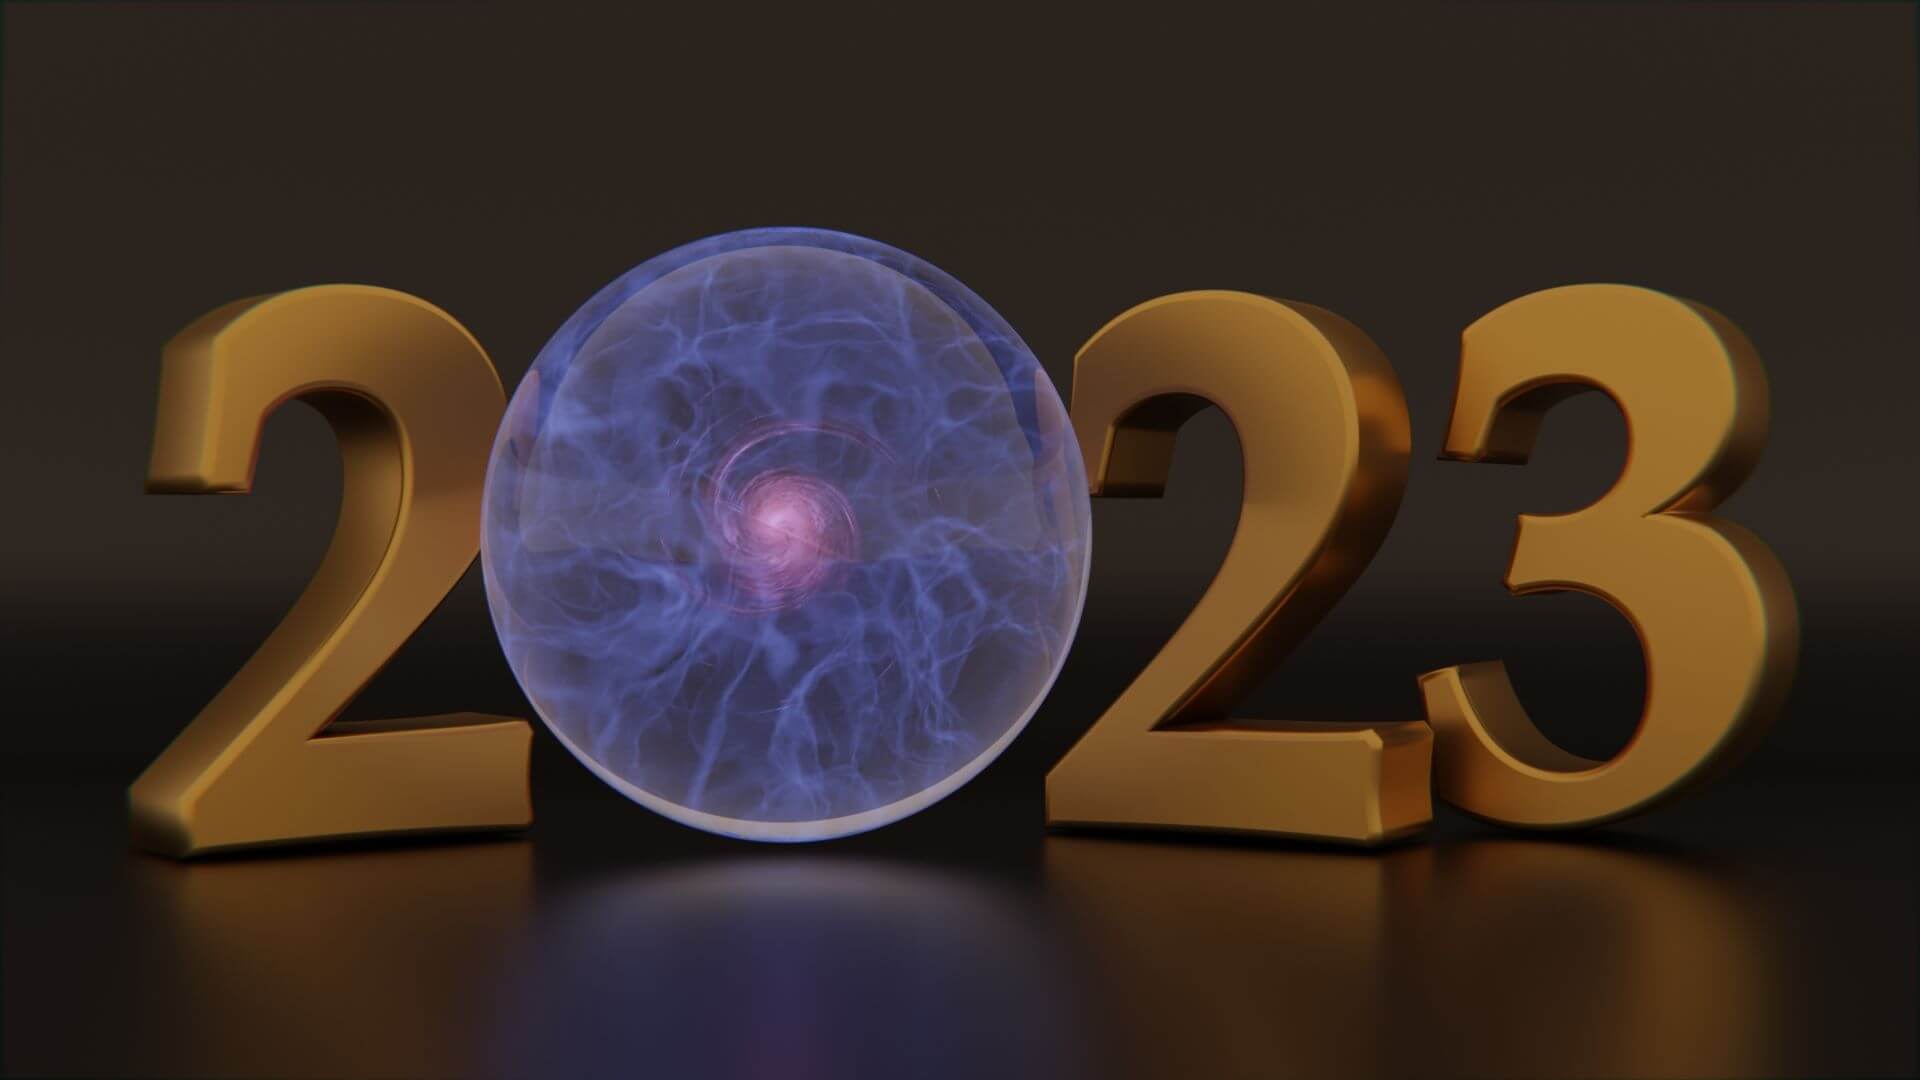 Computer graphic with 2023 in large gold letters standing up, with the zero of 2023 set as a crystal ball with pink and blue plasma lightning 